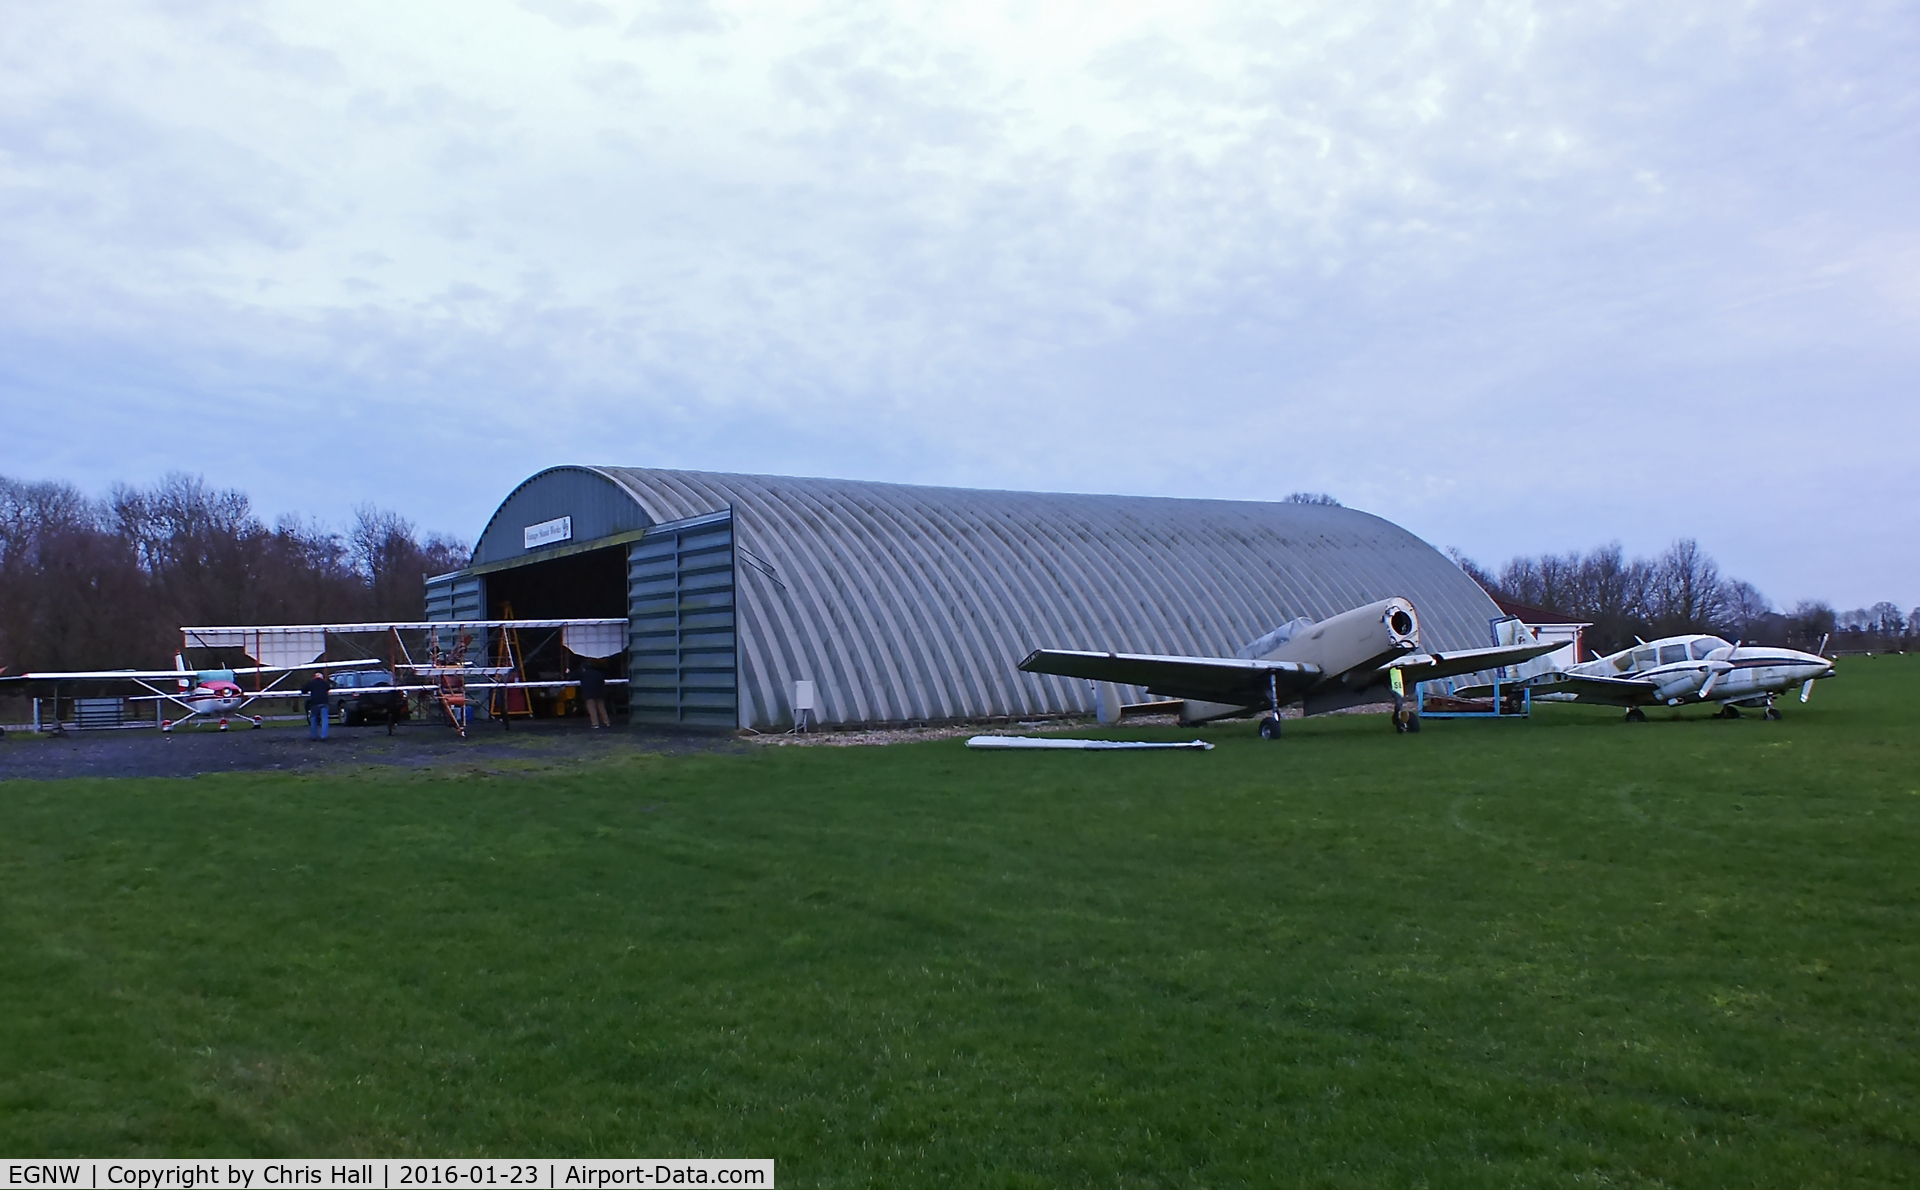 Wickenby Aerodrome Airport, Lincoln, England United Kingdom (EGNW) - the 